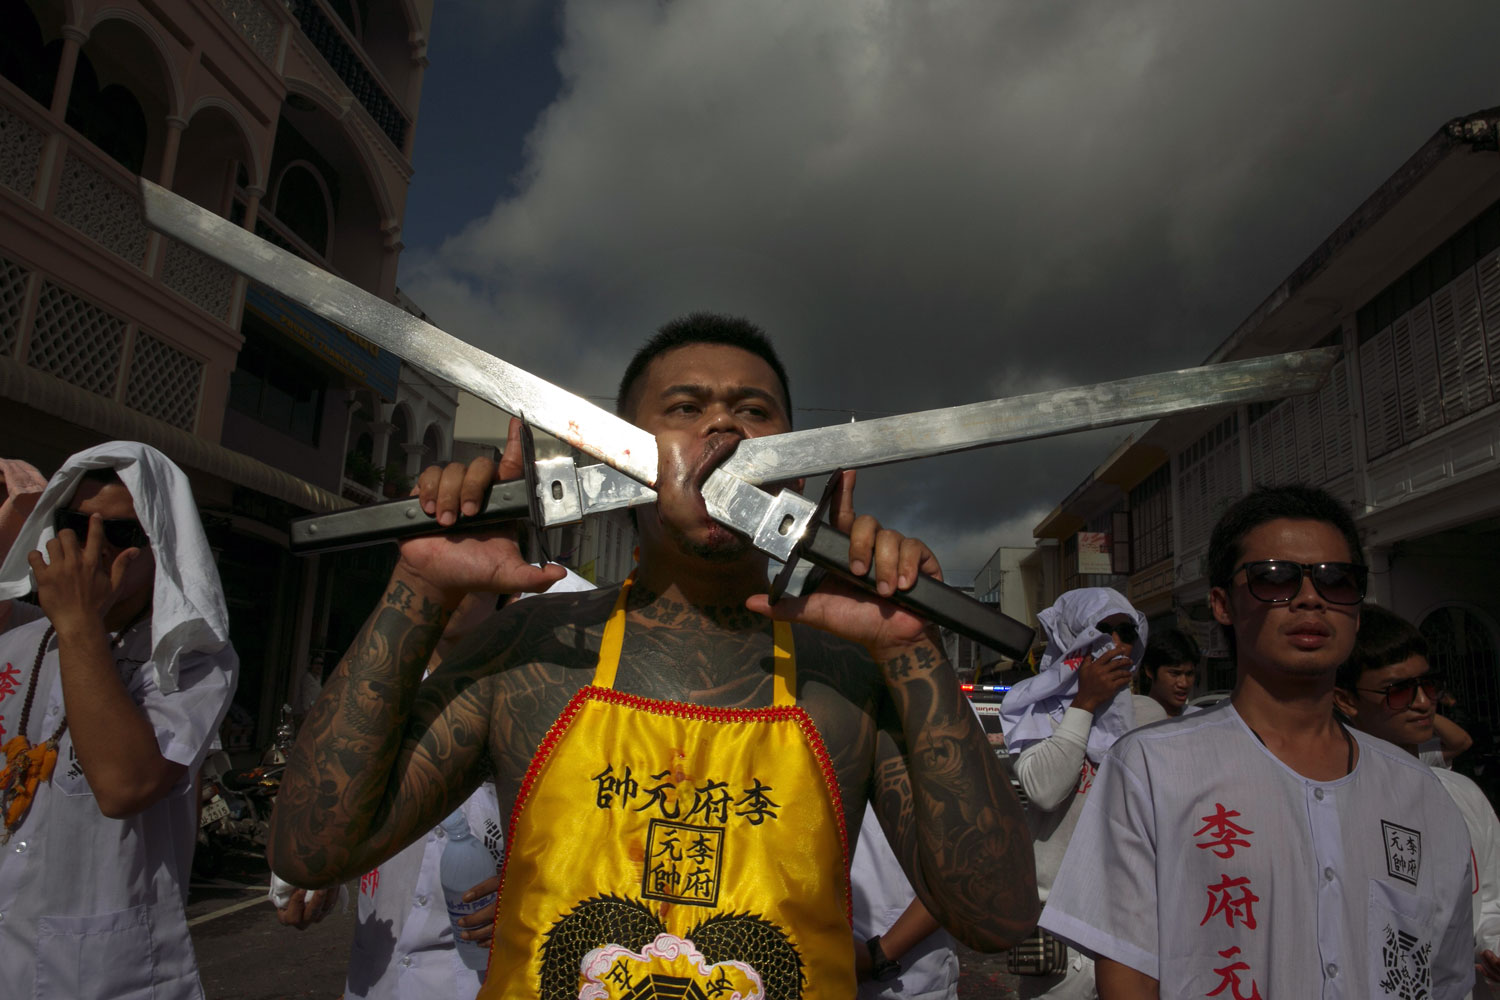 Vegetarian festival devotees parade through the streets of downtown Phuket, Thailand. Participants in the festival pierce their bodies to shift evil spirits from others onto themselves and bring good luck to the community.